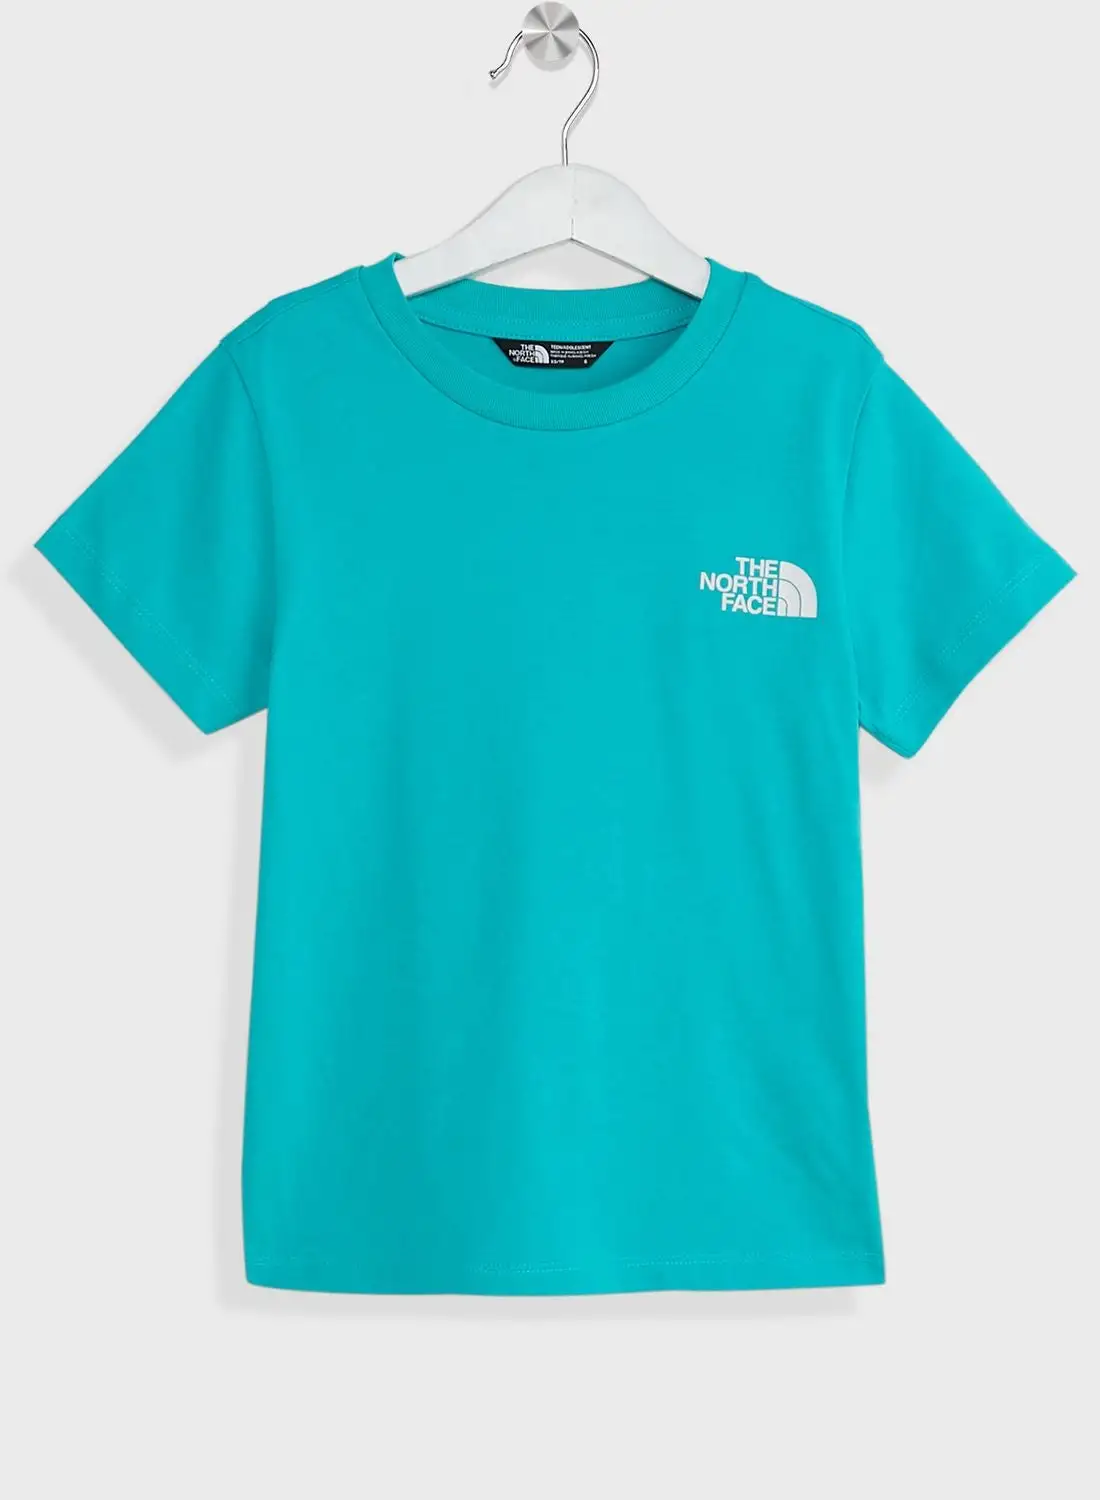 northface Simple Dome Teen T-Shirt